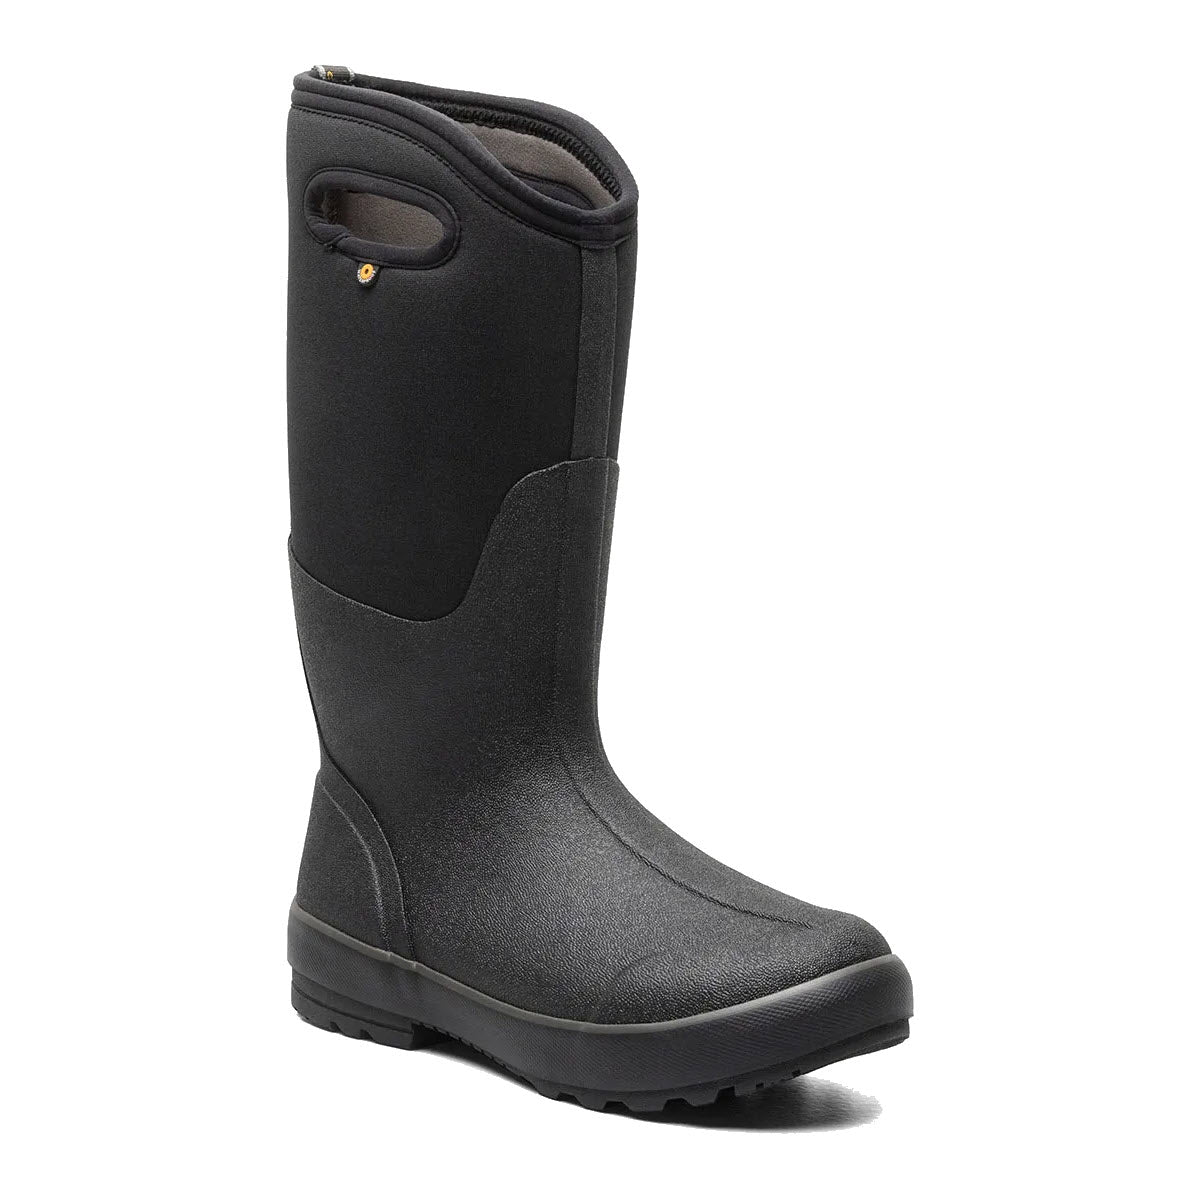 A black neoprene Bogs Classic Tall II tall boot with a robust rubber sole, featuring a loop on the back for easy pulling on.